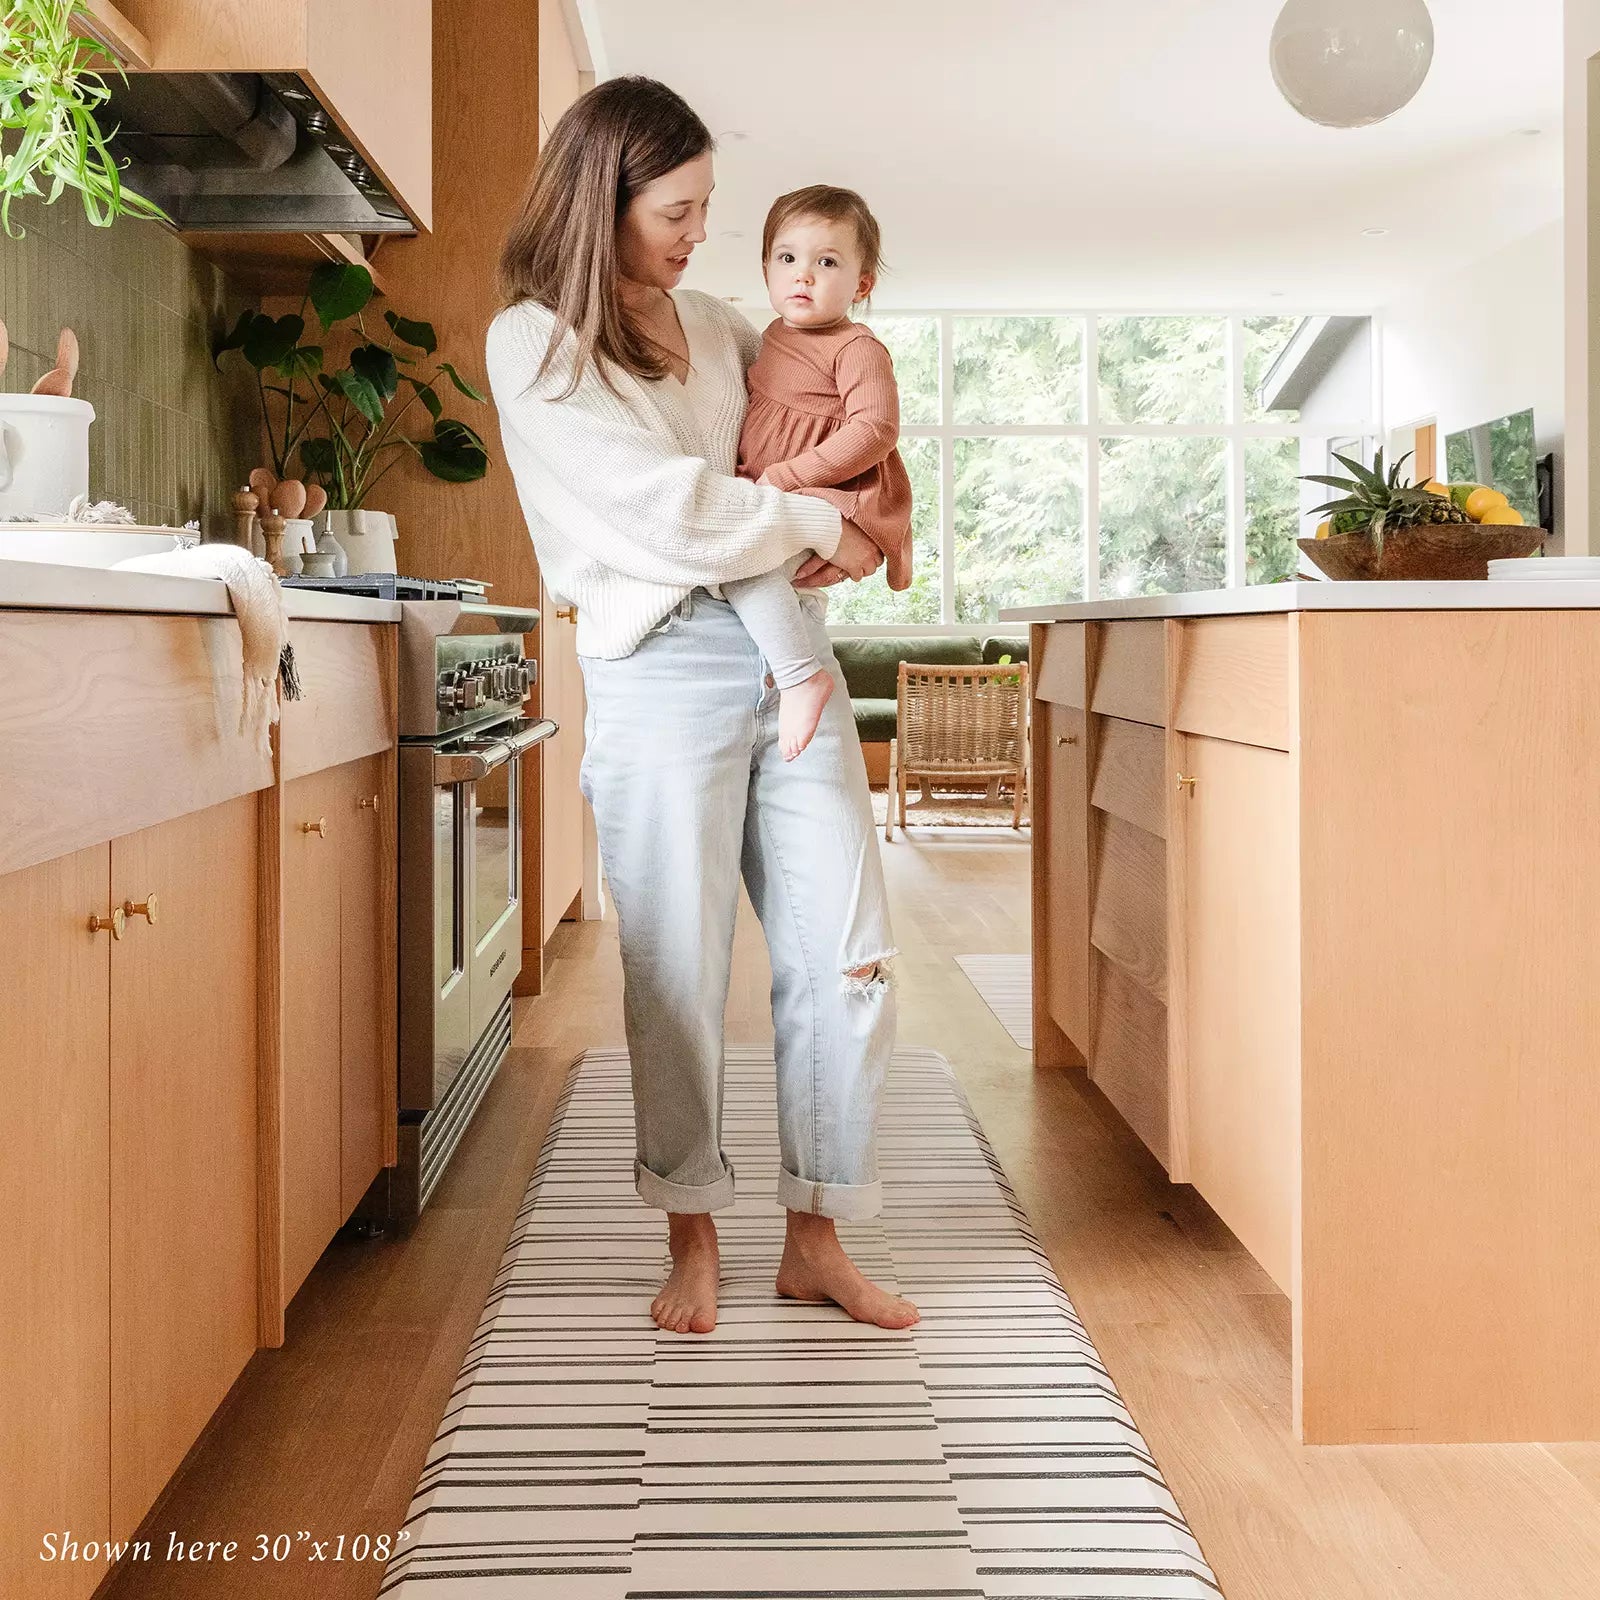 Black and white inverted stripe kitchen mat in kitchen with Mom holding a baby standing on size 30x108.